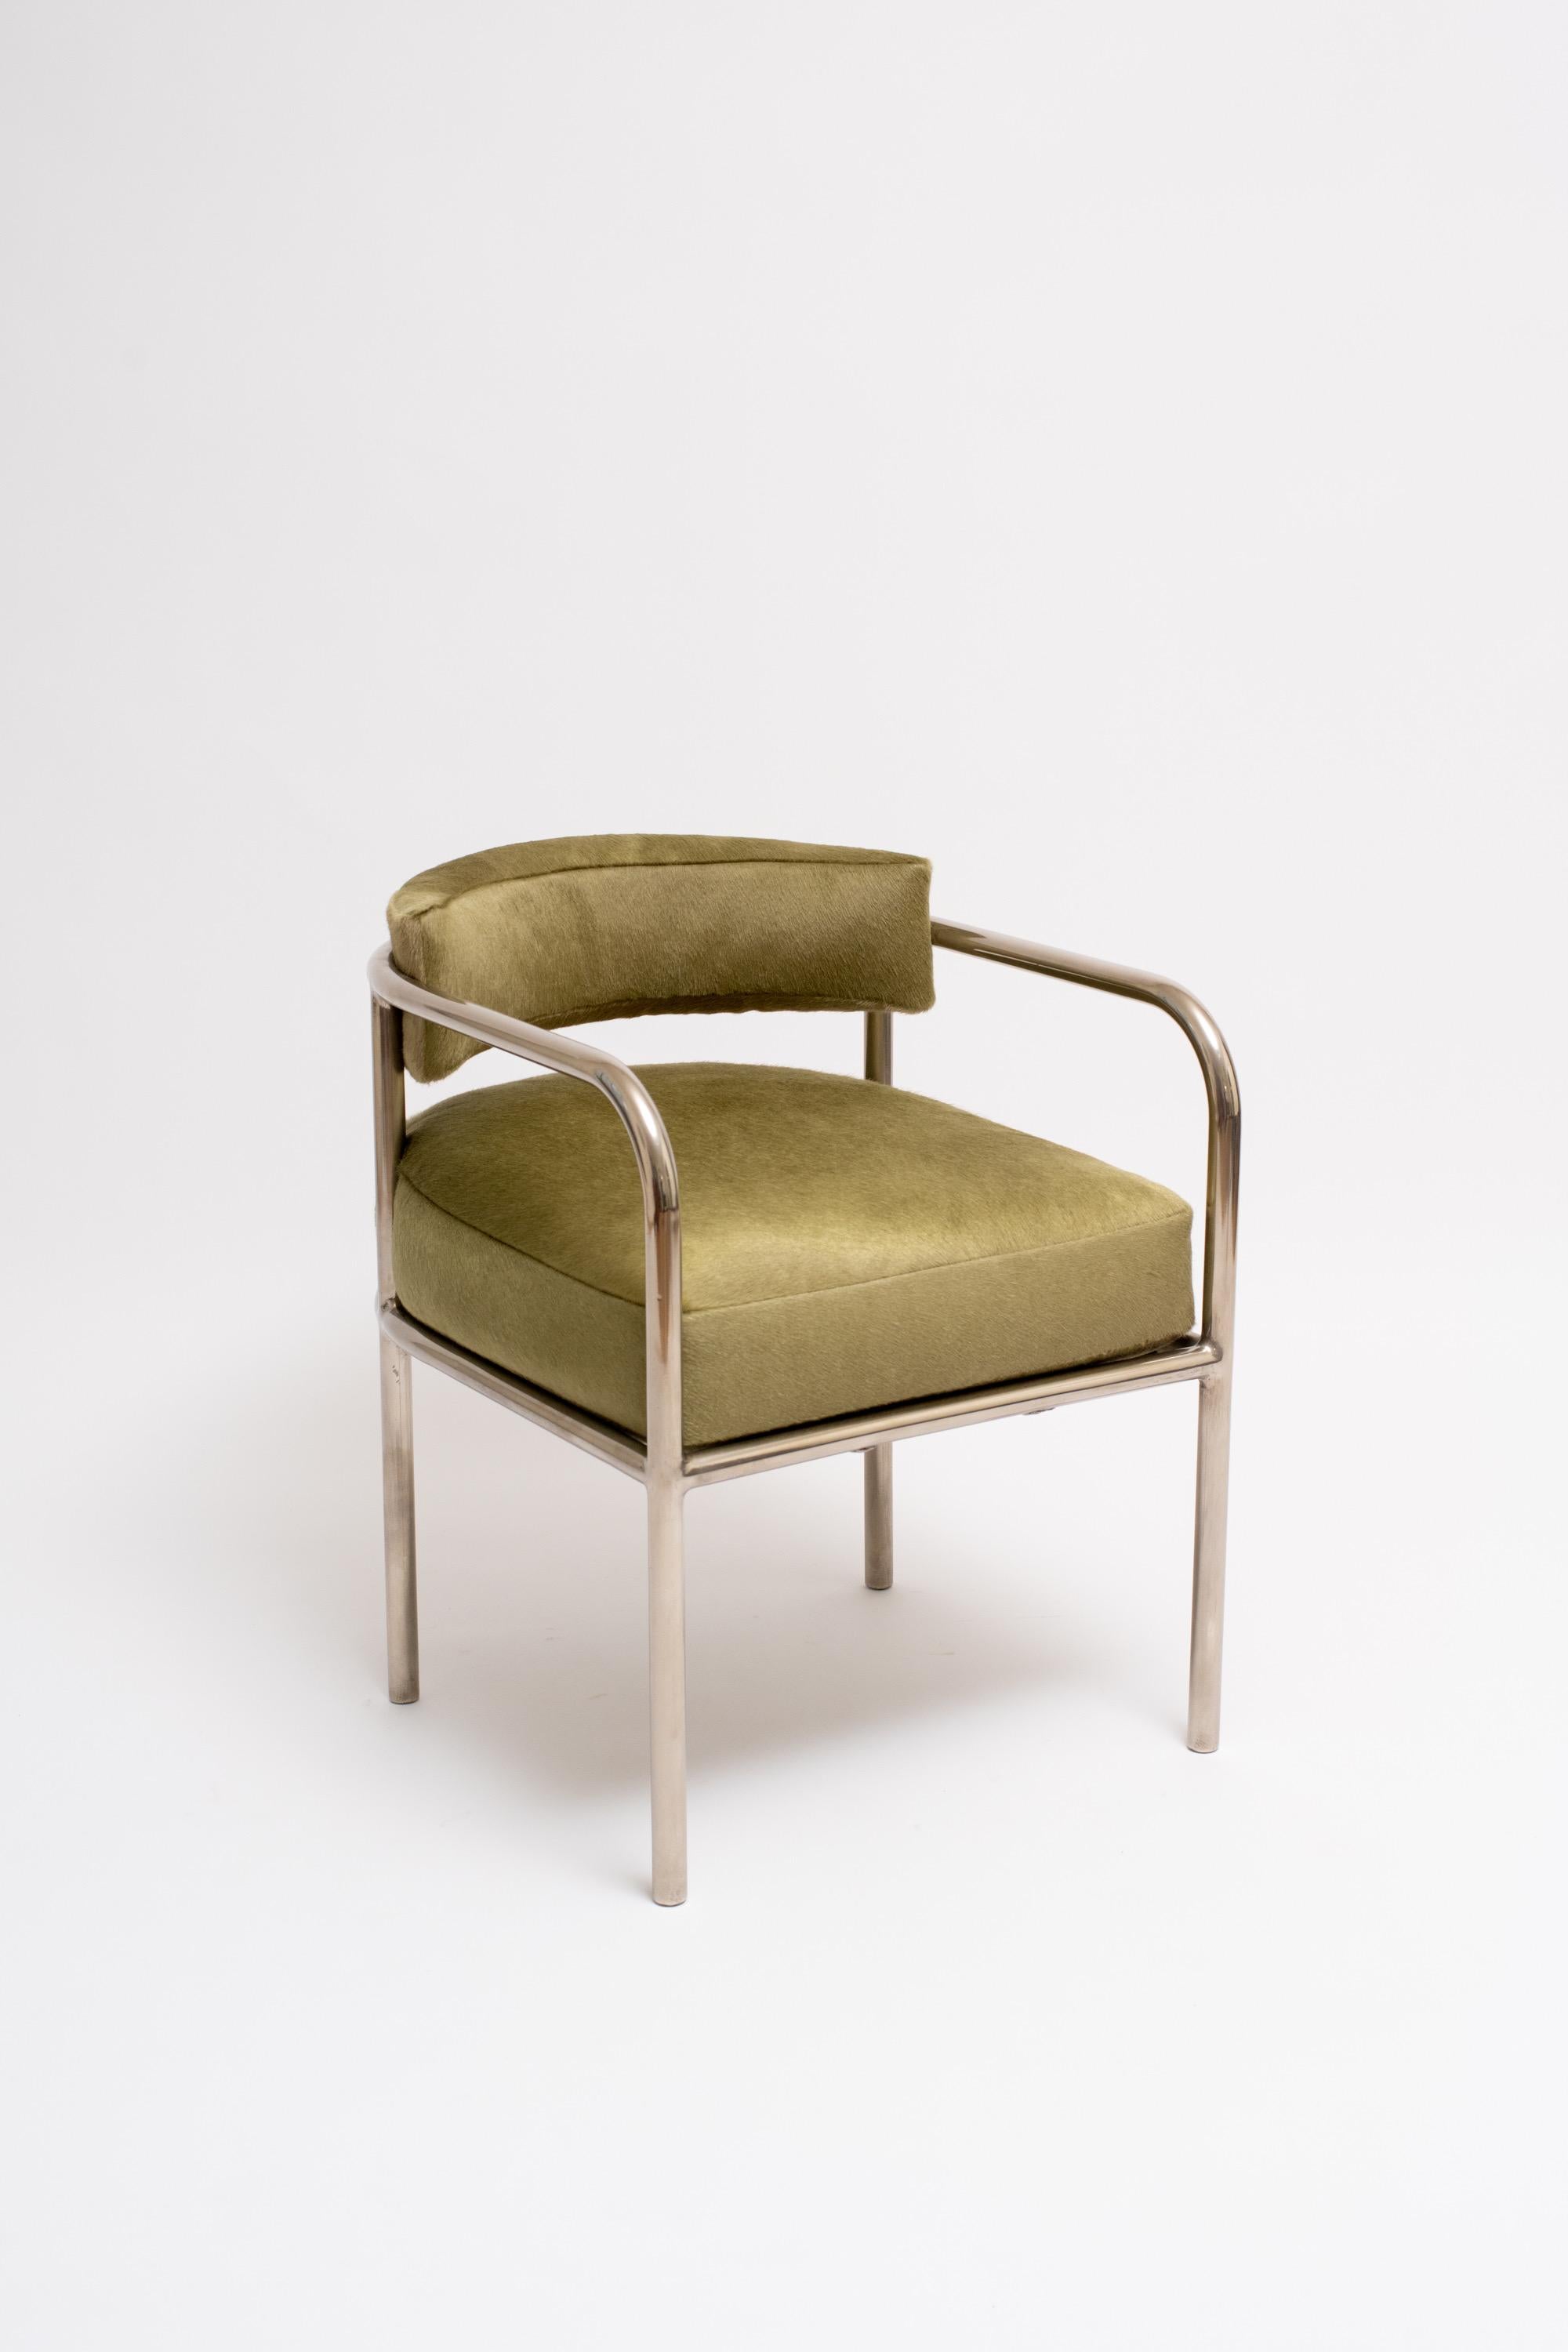 A rare armchair of nickel-plated tubular steel and calfskin cushions by French modernist René Herbst. Herbst was a founding member of the Union des Artistes Modernes, an influential group of progressive designers that included: Eileen Gray, Le